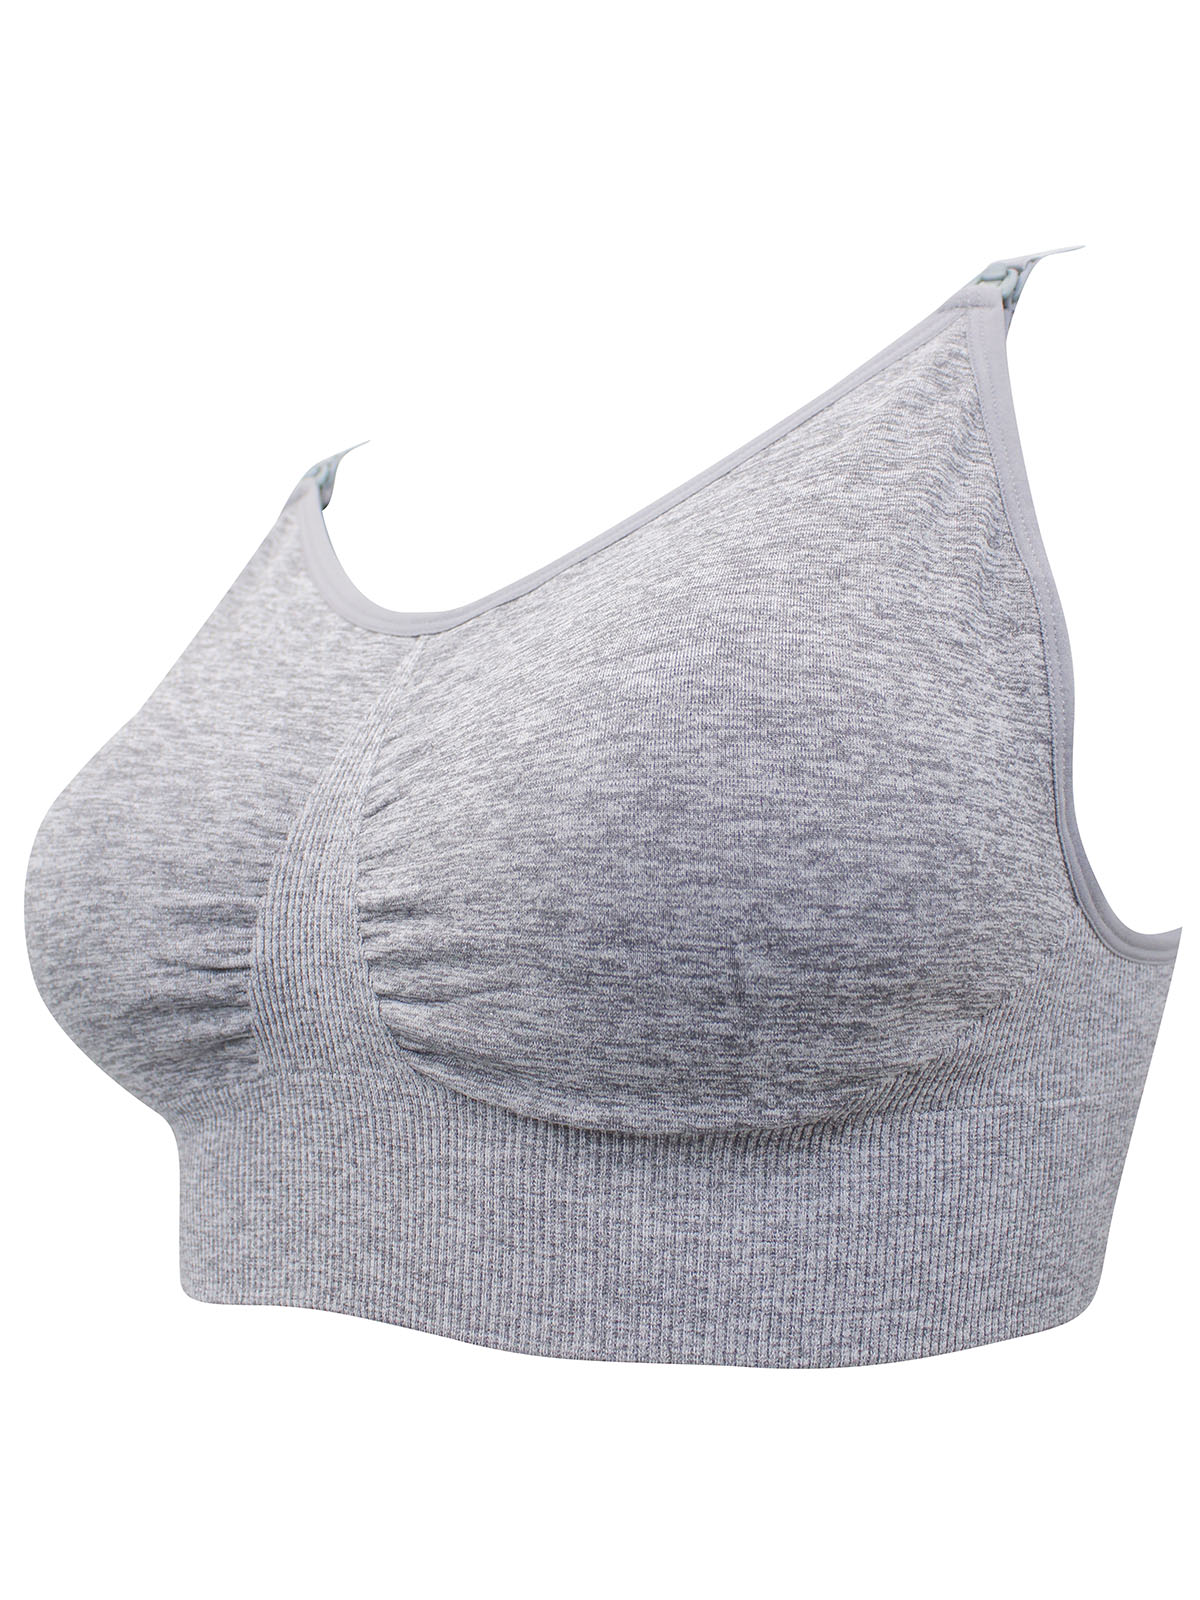 2pk Mothercare Nursing Bras Non-Wired Padded Drop Cup Comfort